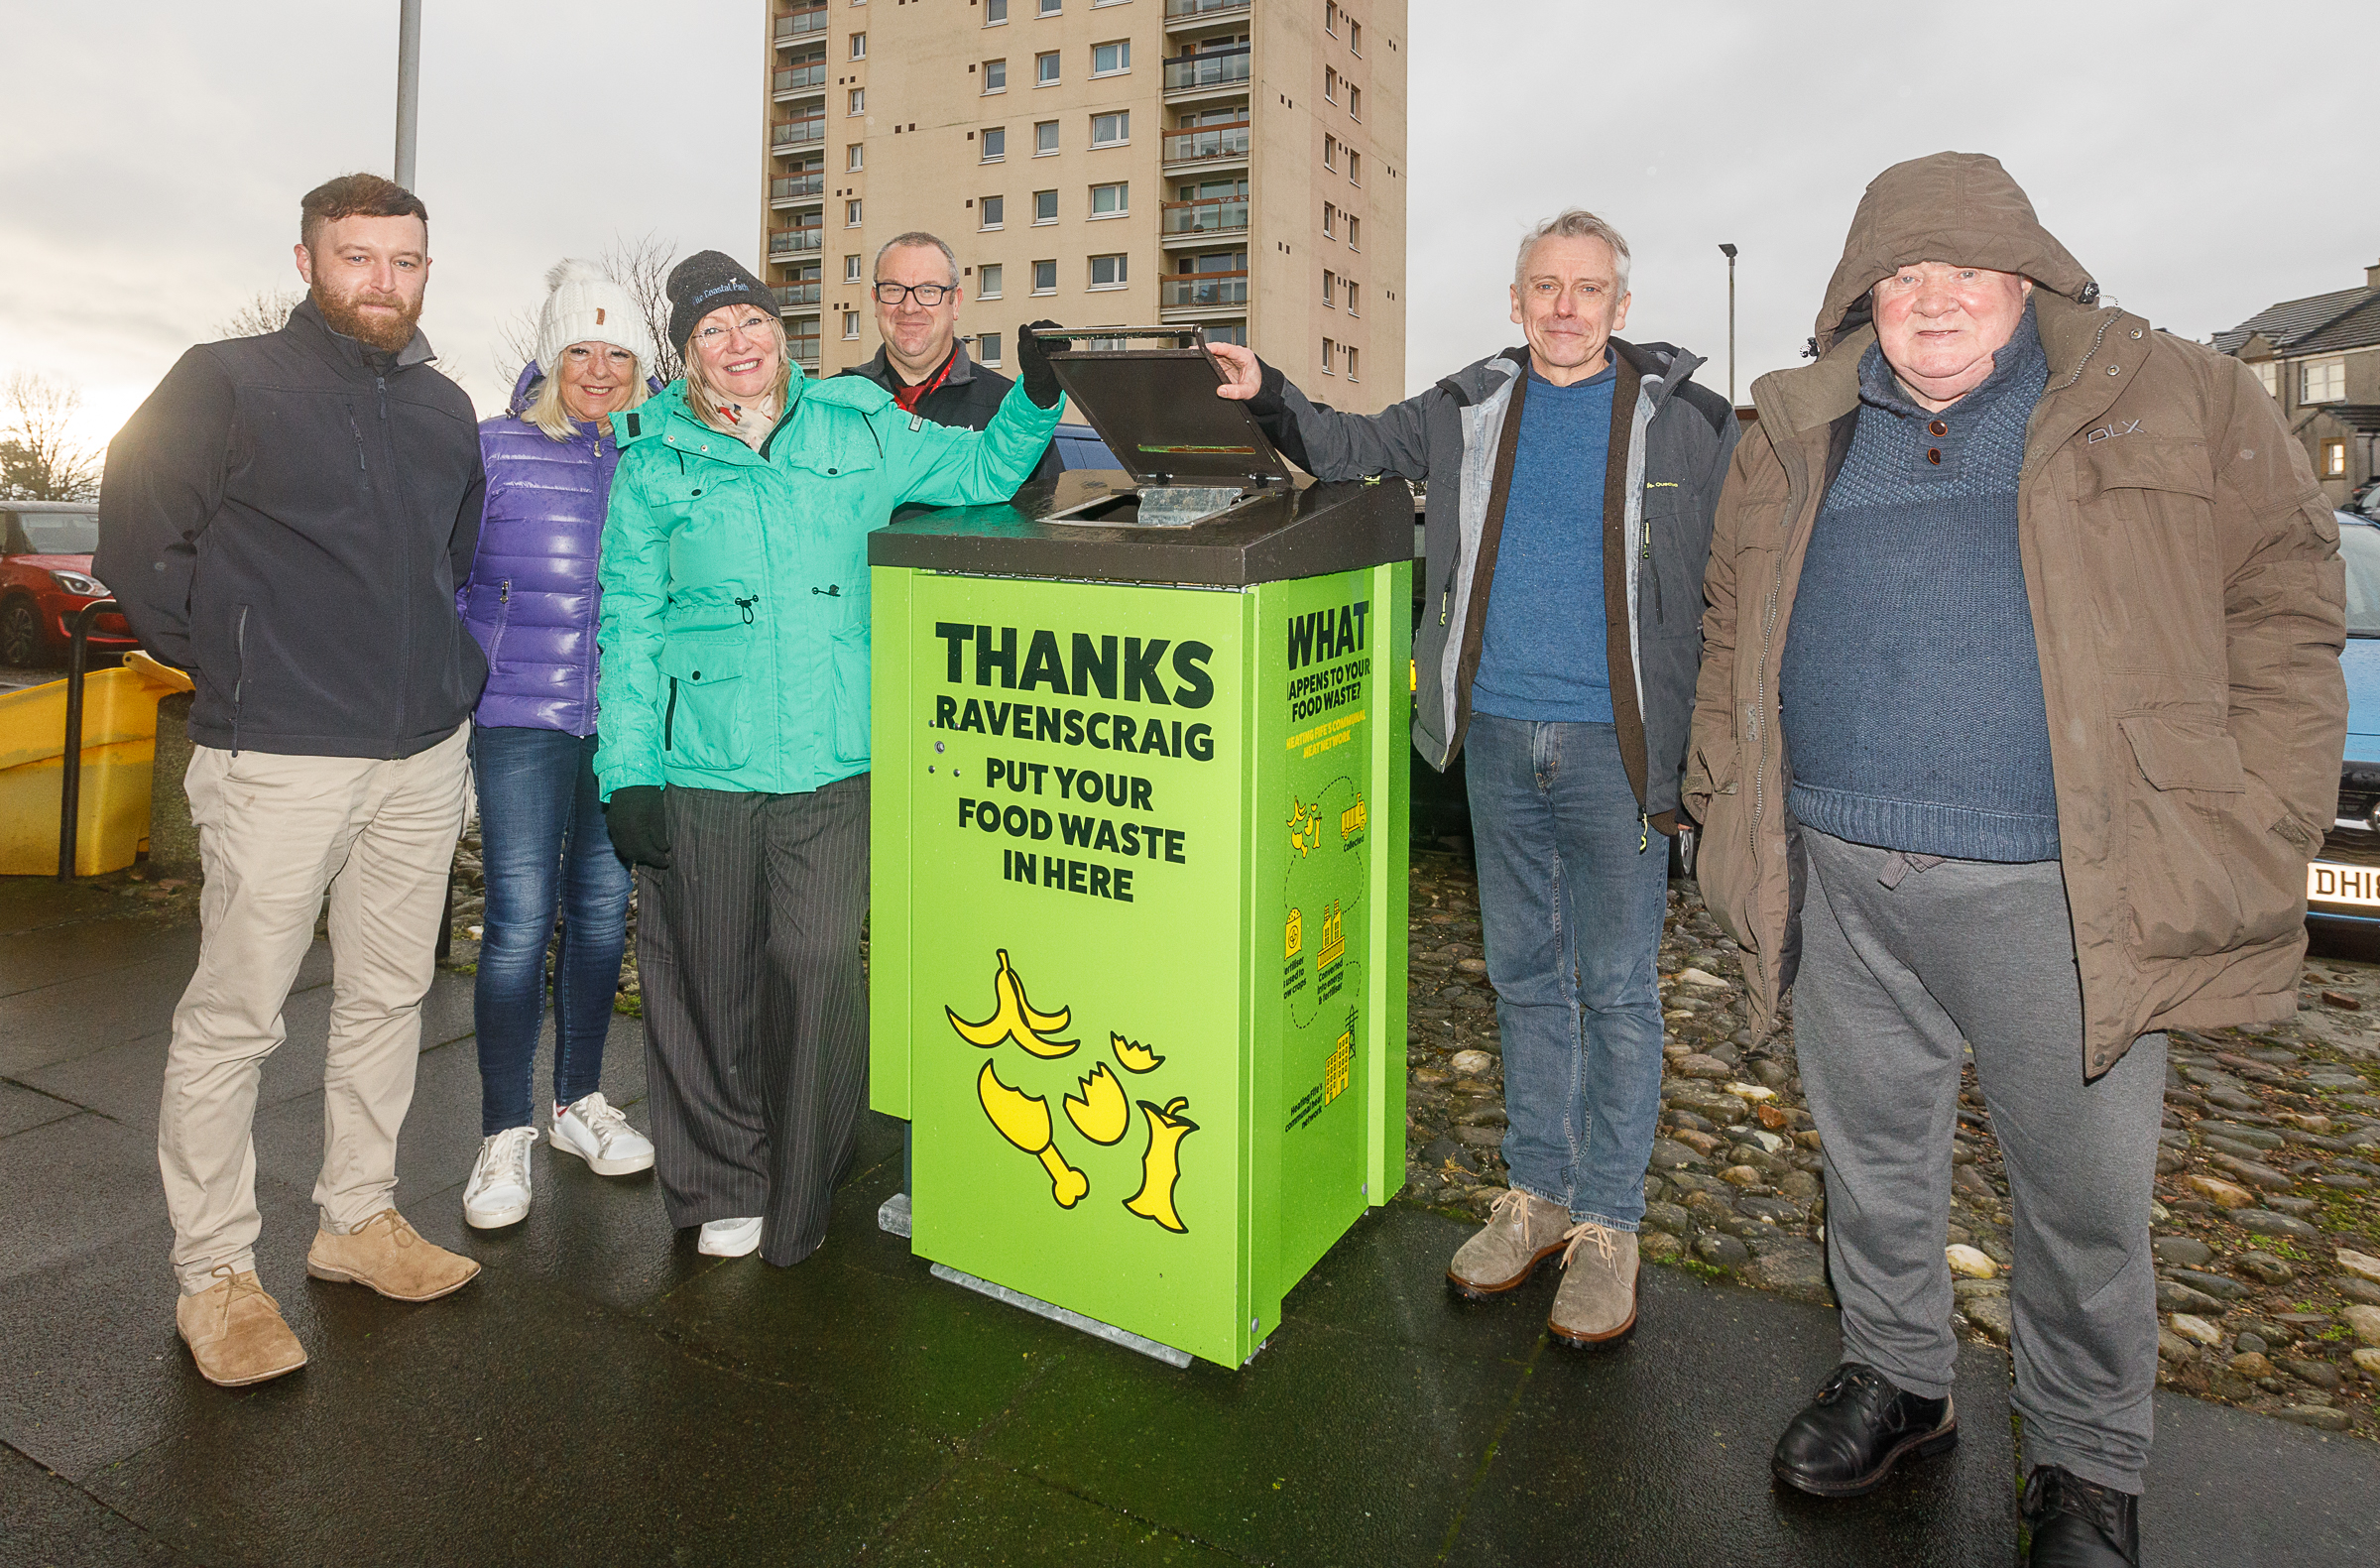 Food waste rollout for Fife high-rise flats